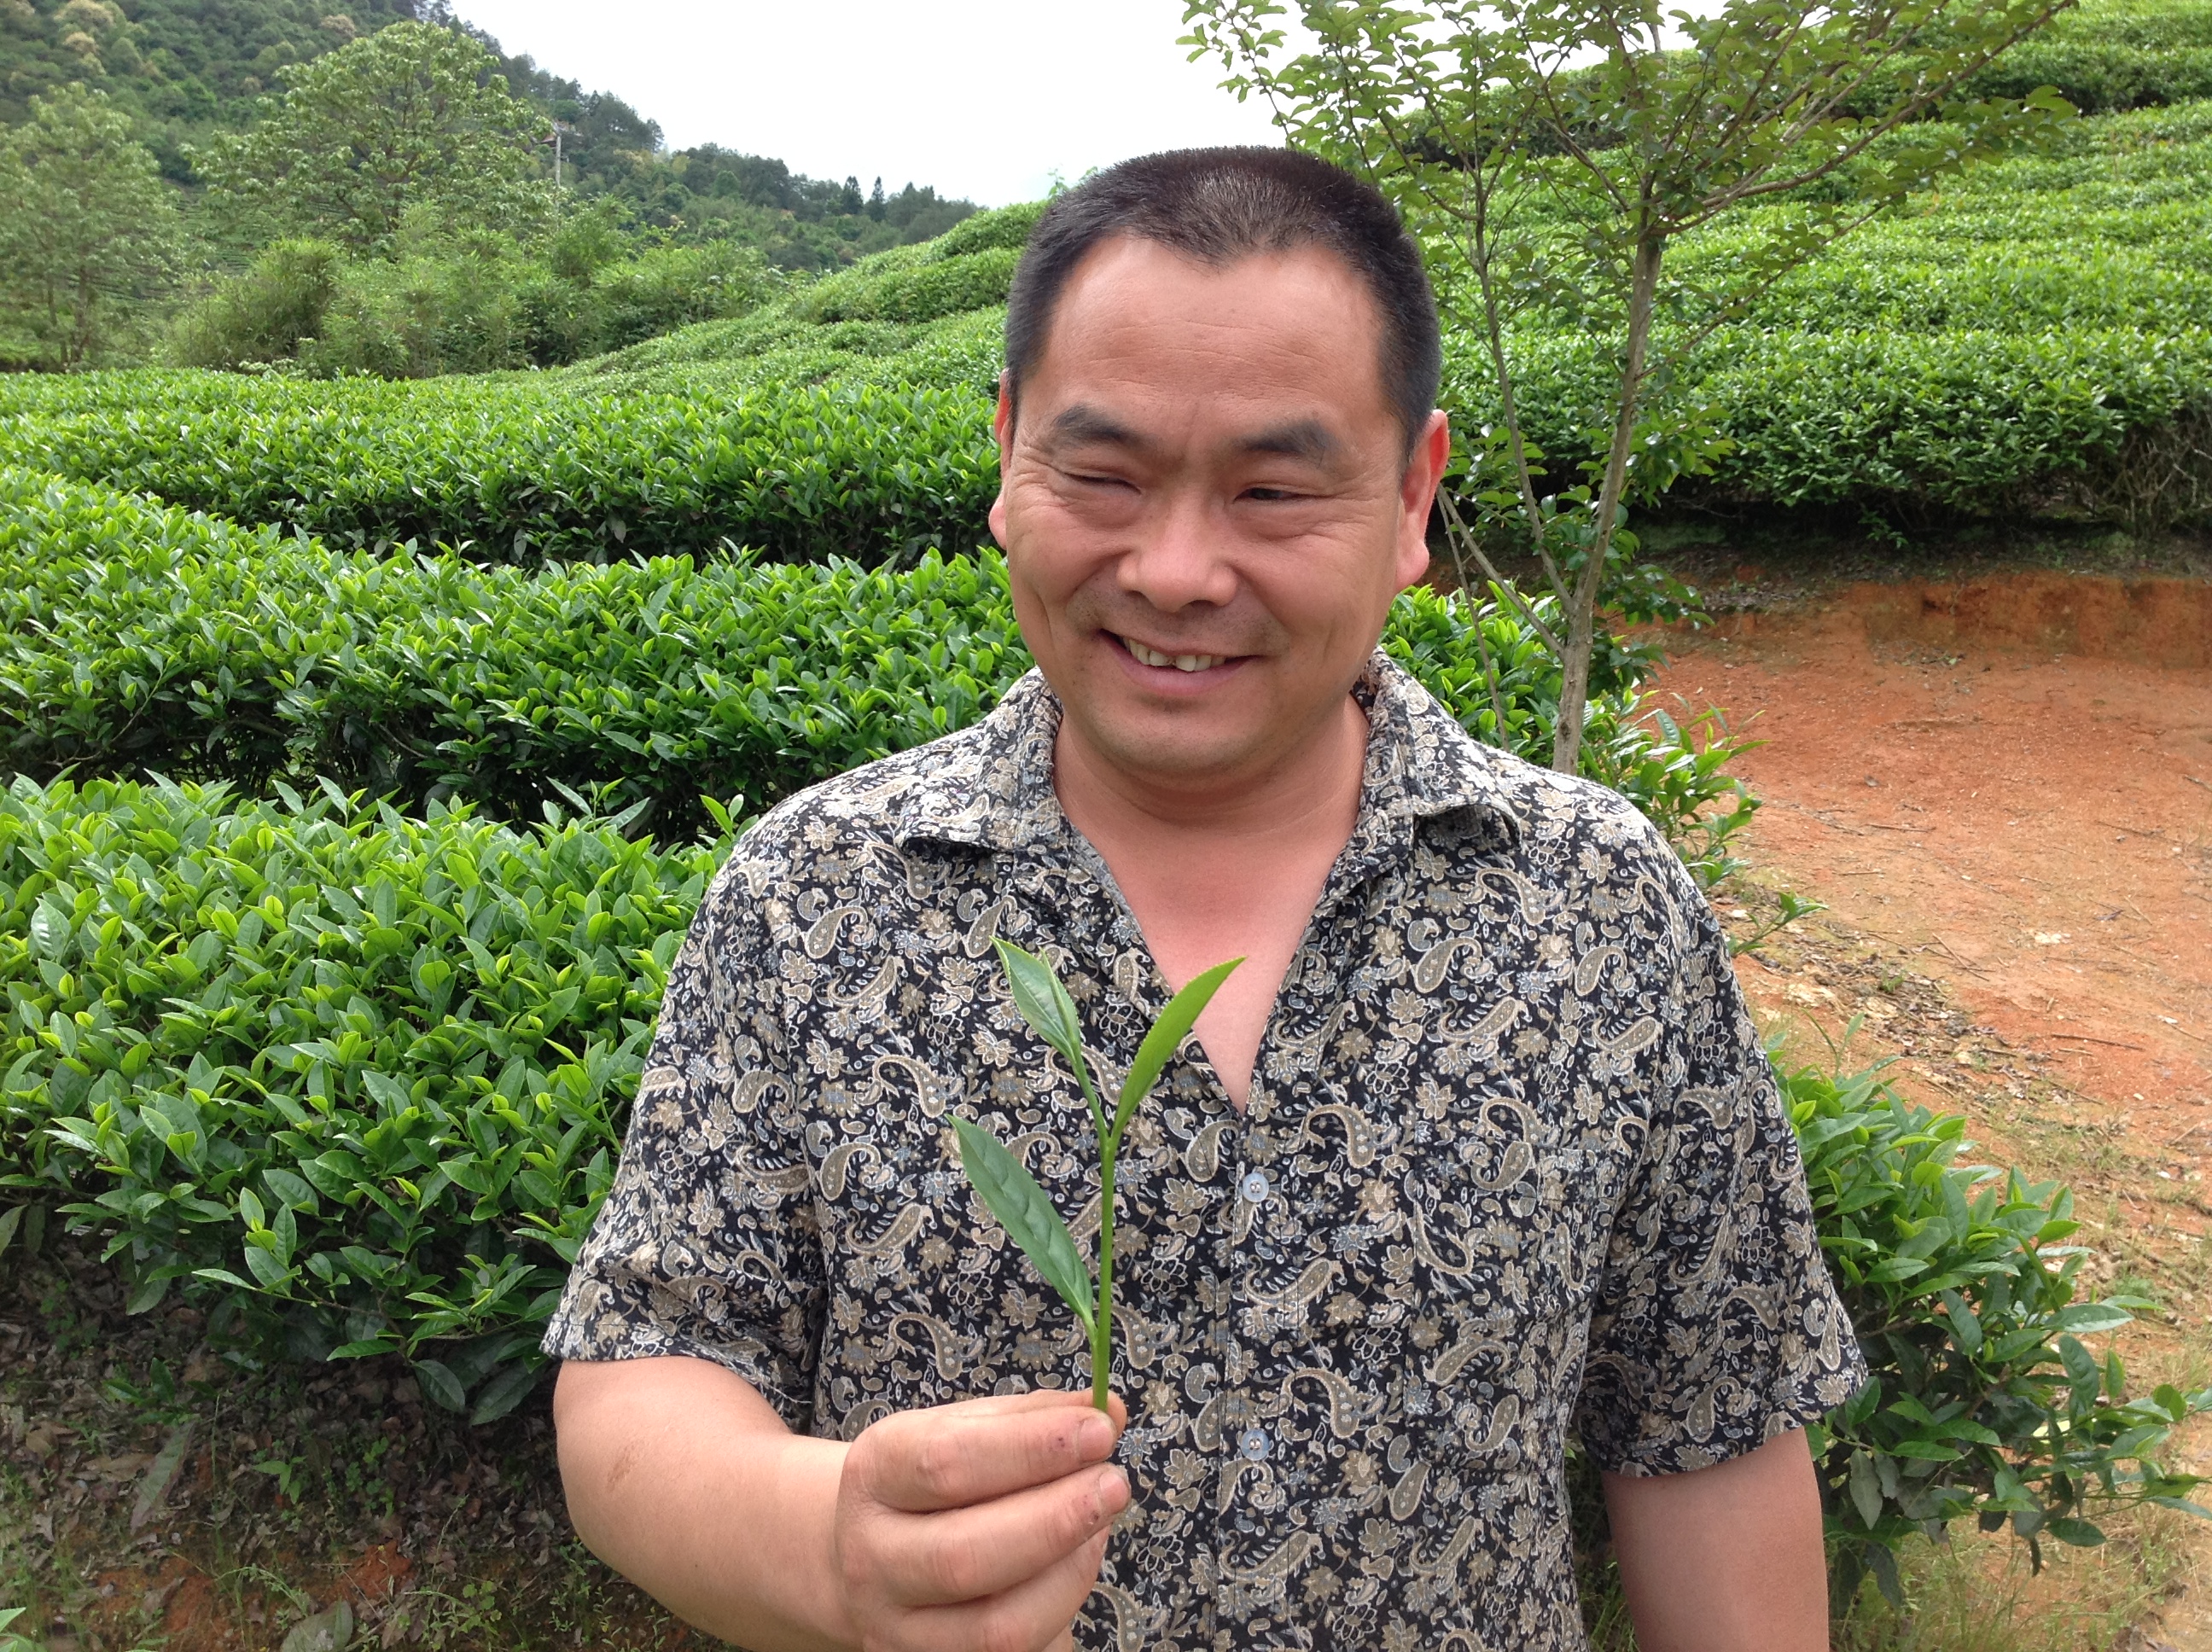 Rock Wulong tea maker Zhou Yousheng standing in front of a row of tea bushes in the garden and holding a sprig of fresh tea.